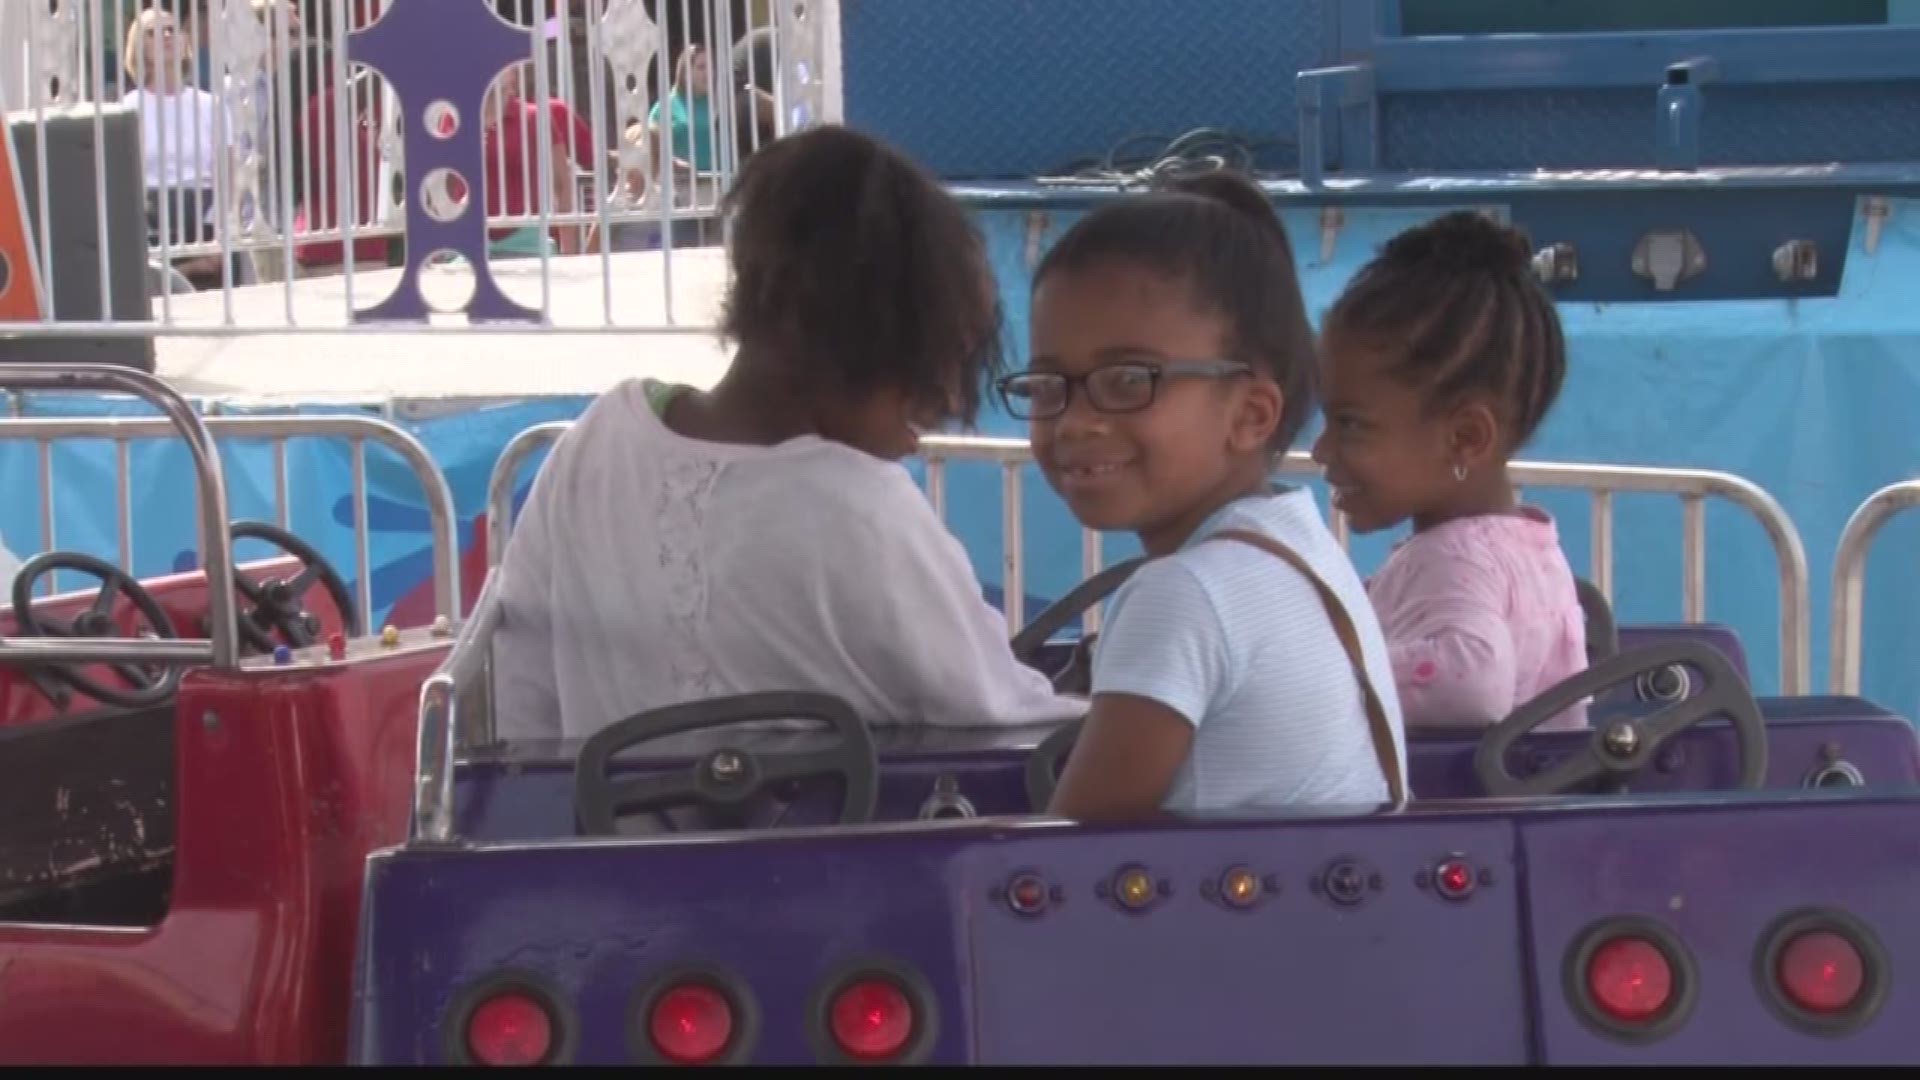 The 148th SC State Fair opens Wednesday! Here's what you need to know: on.wltx.com/2hANNRk